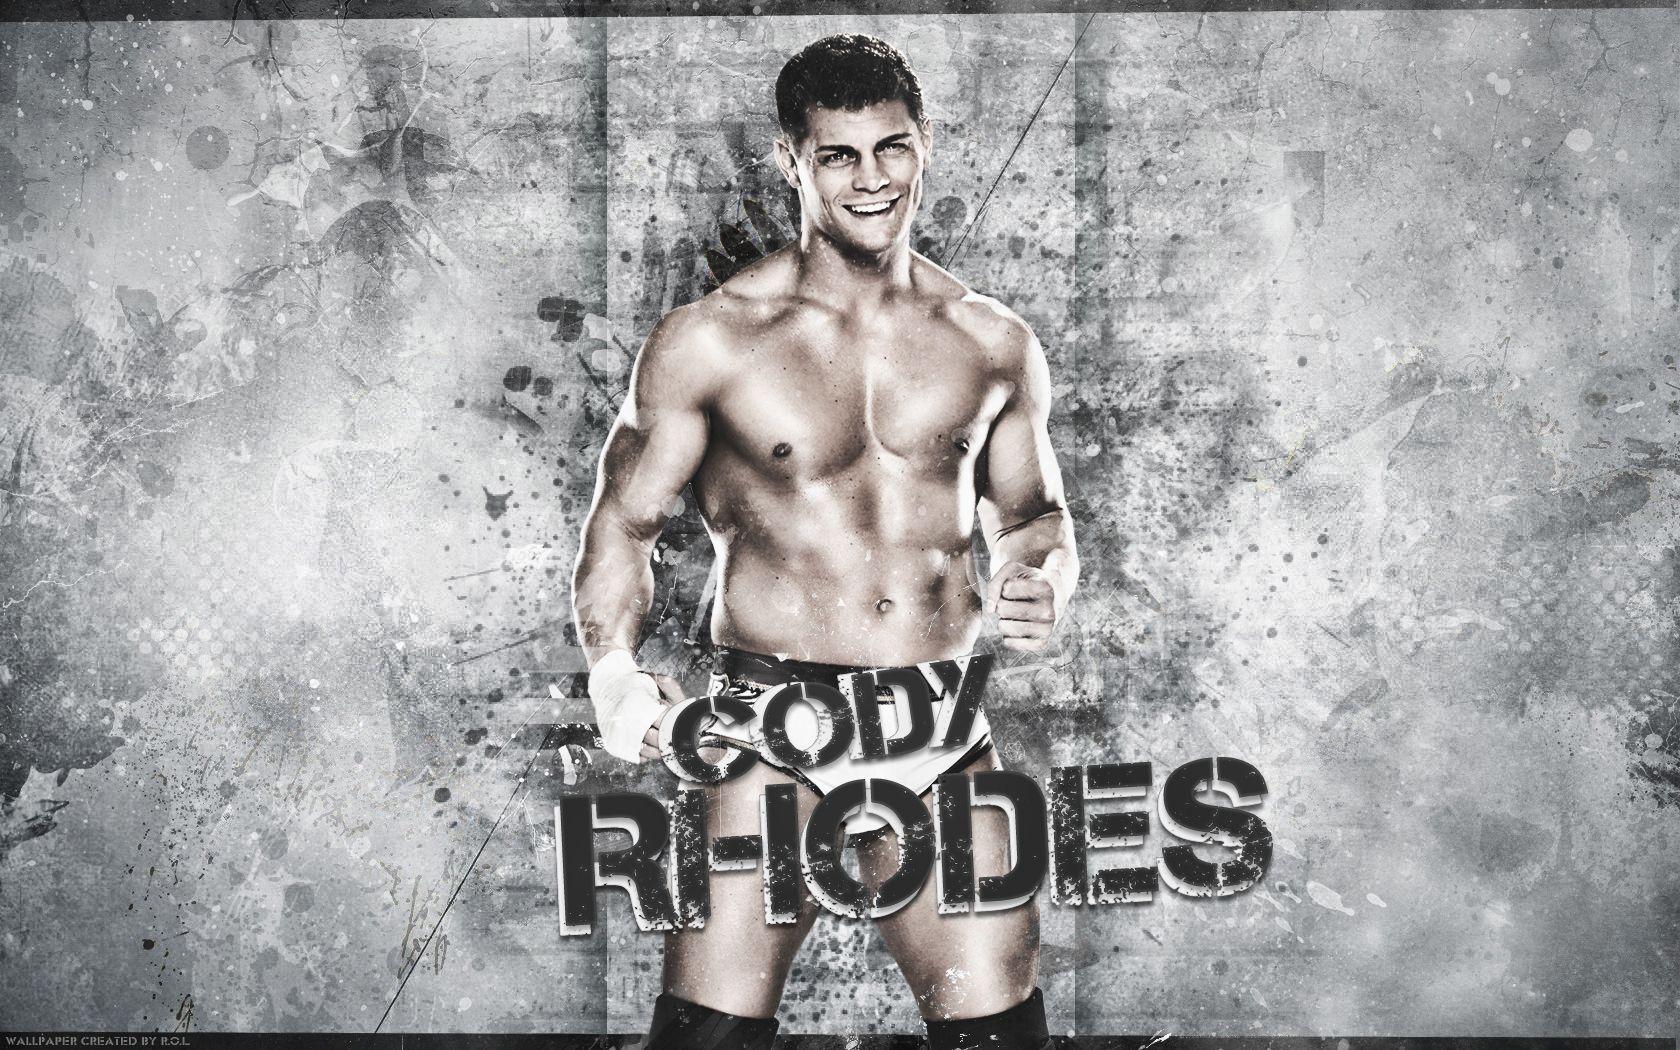 Cody Rhodes Wallpapers - Wallpaper Cave.